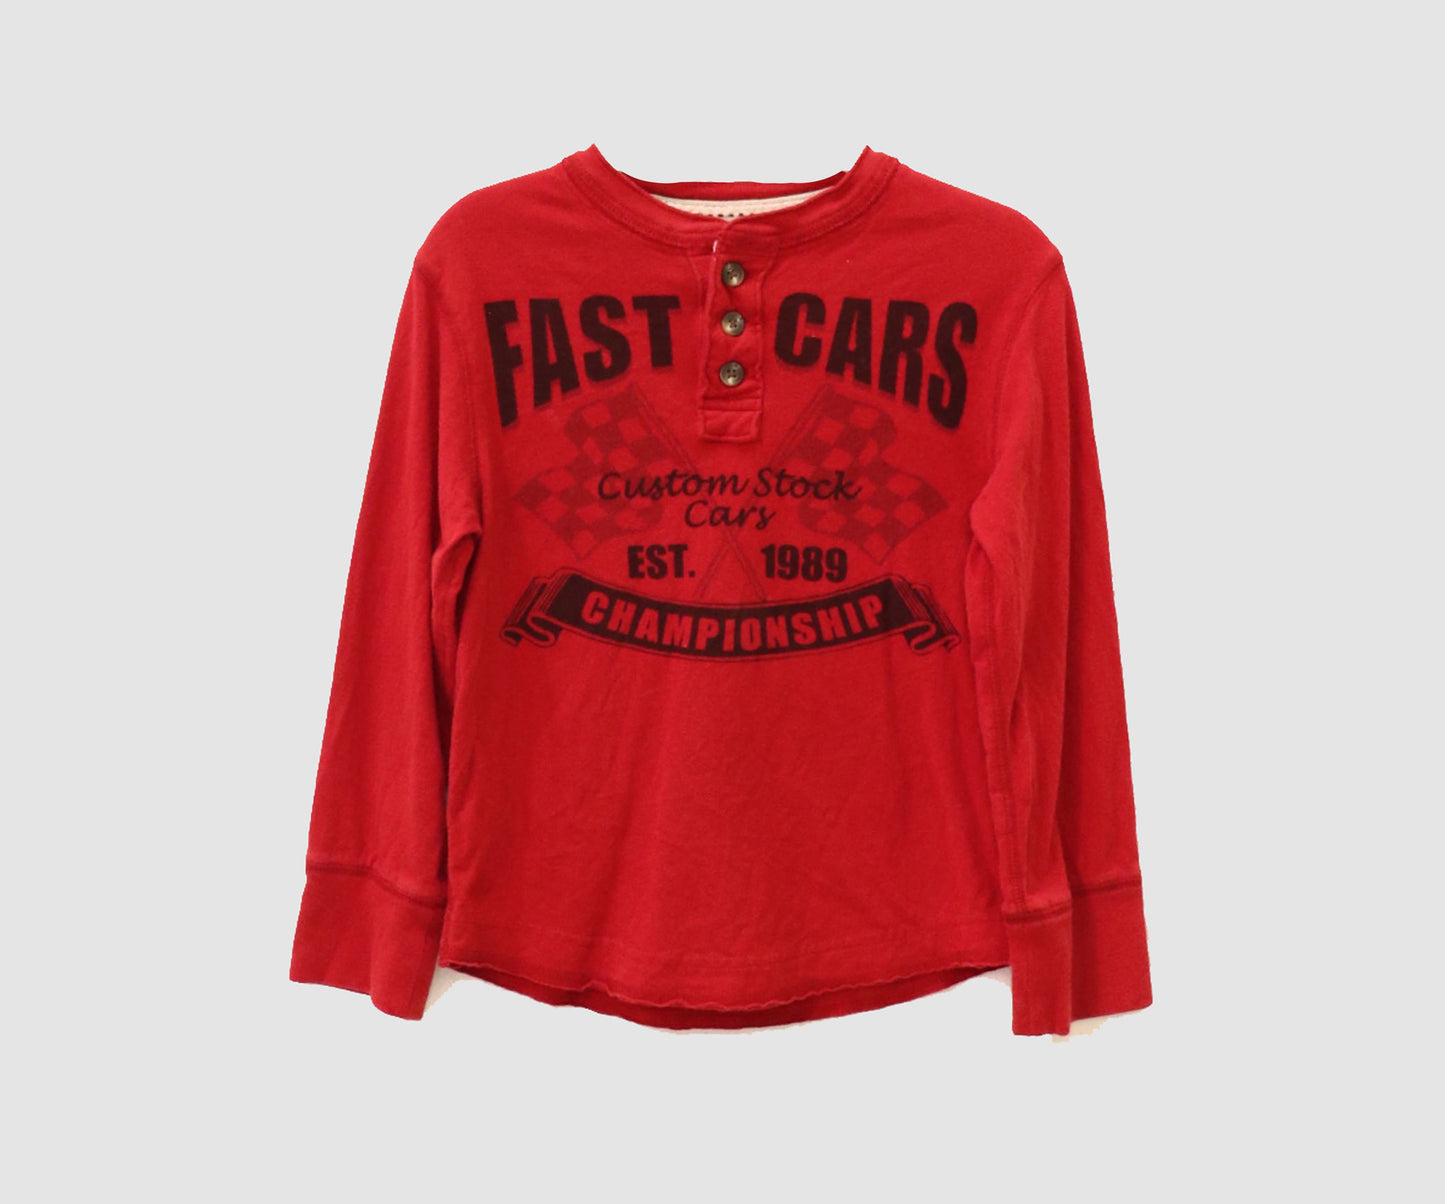 PLC Boys Tops 5-6 Years / Red Long Sleeve Top